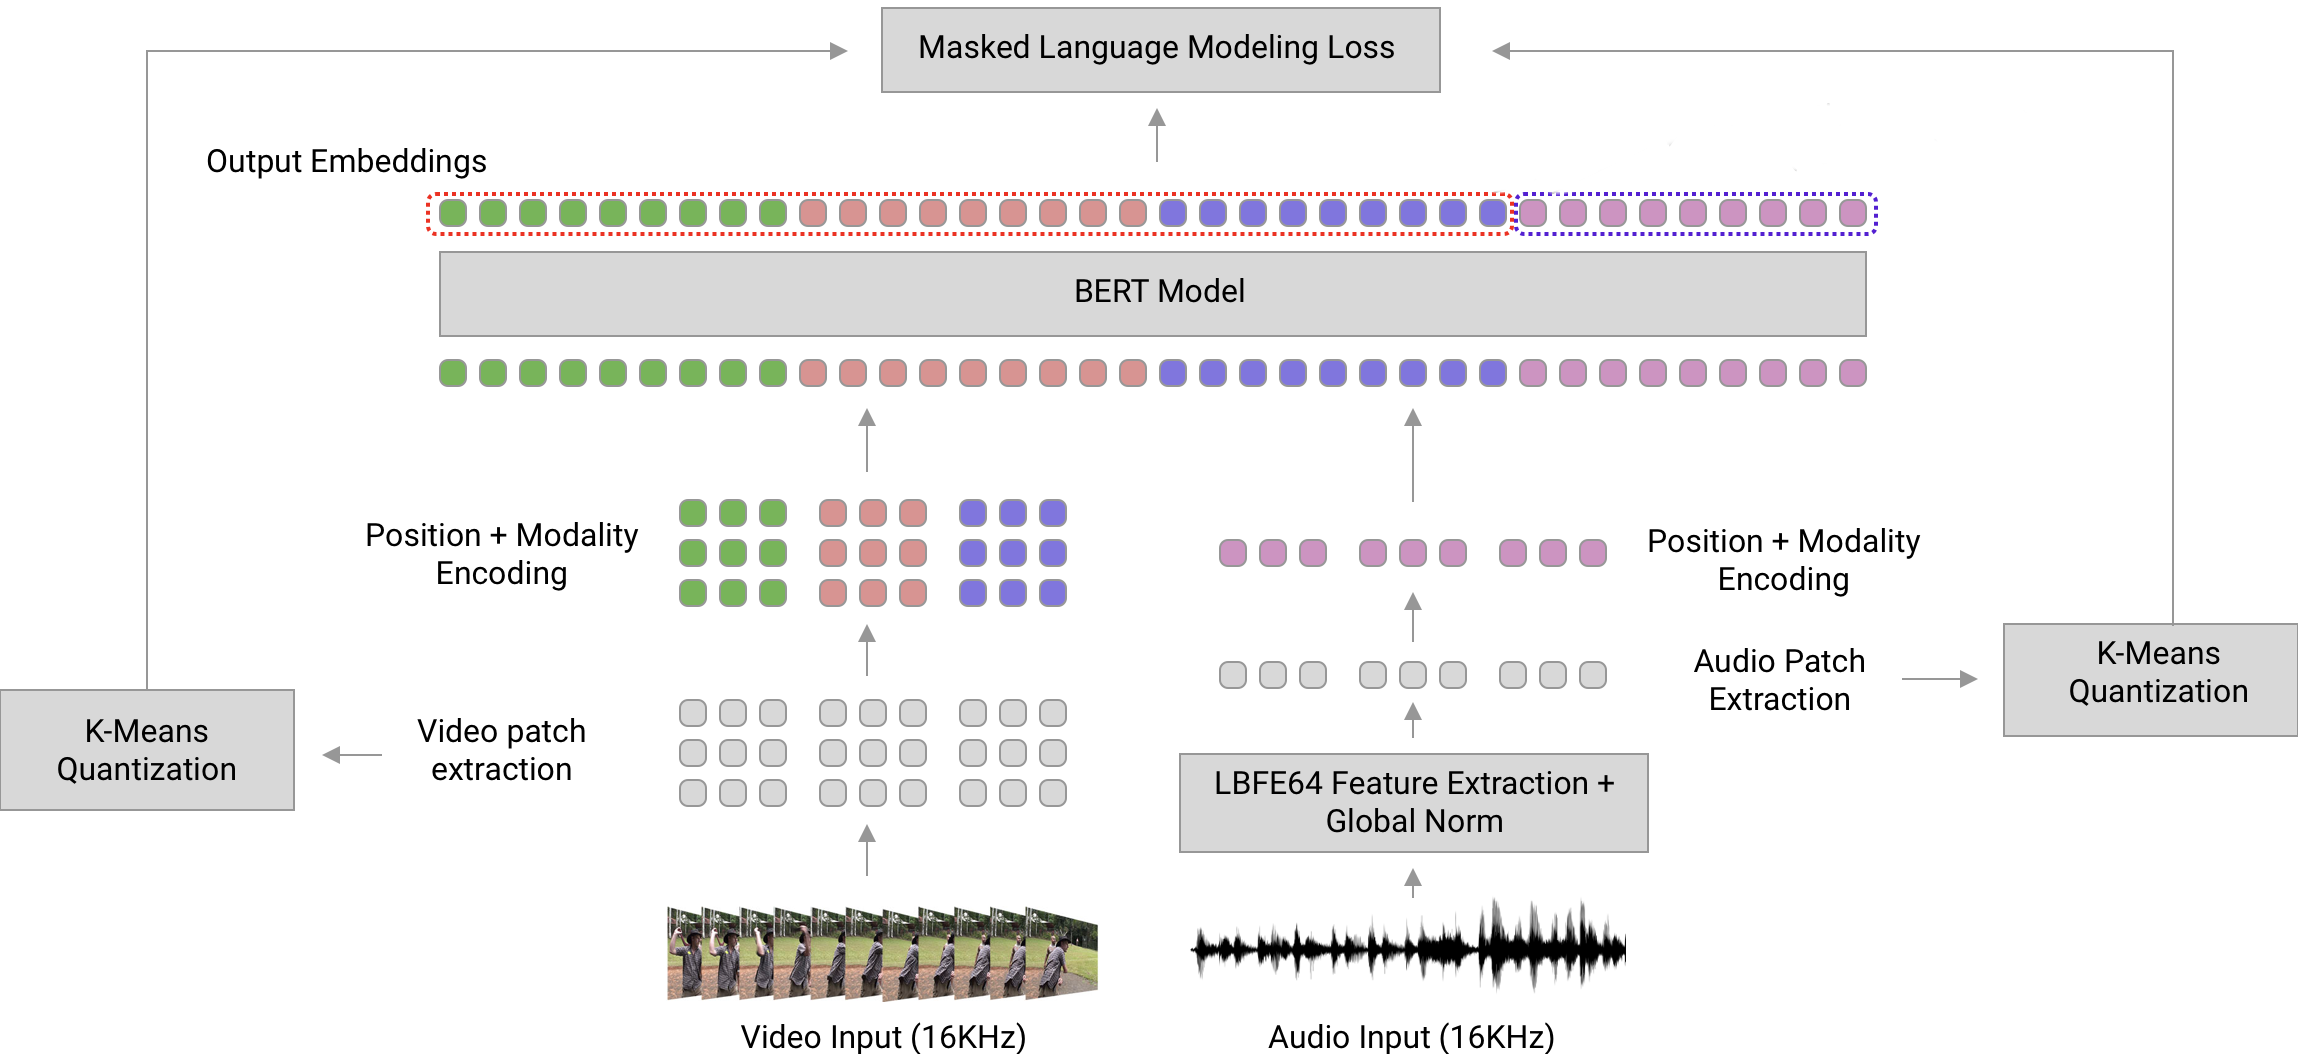 A diagram of a machine learning model